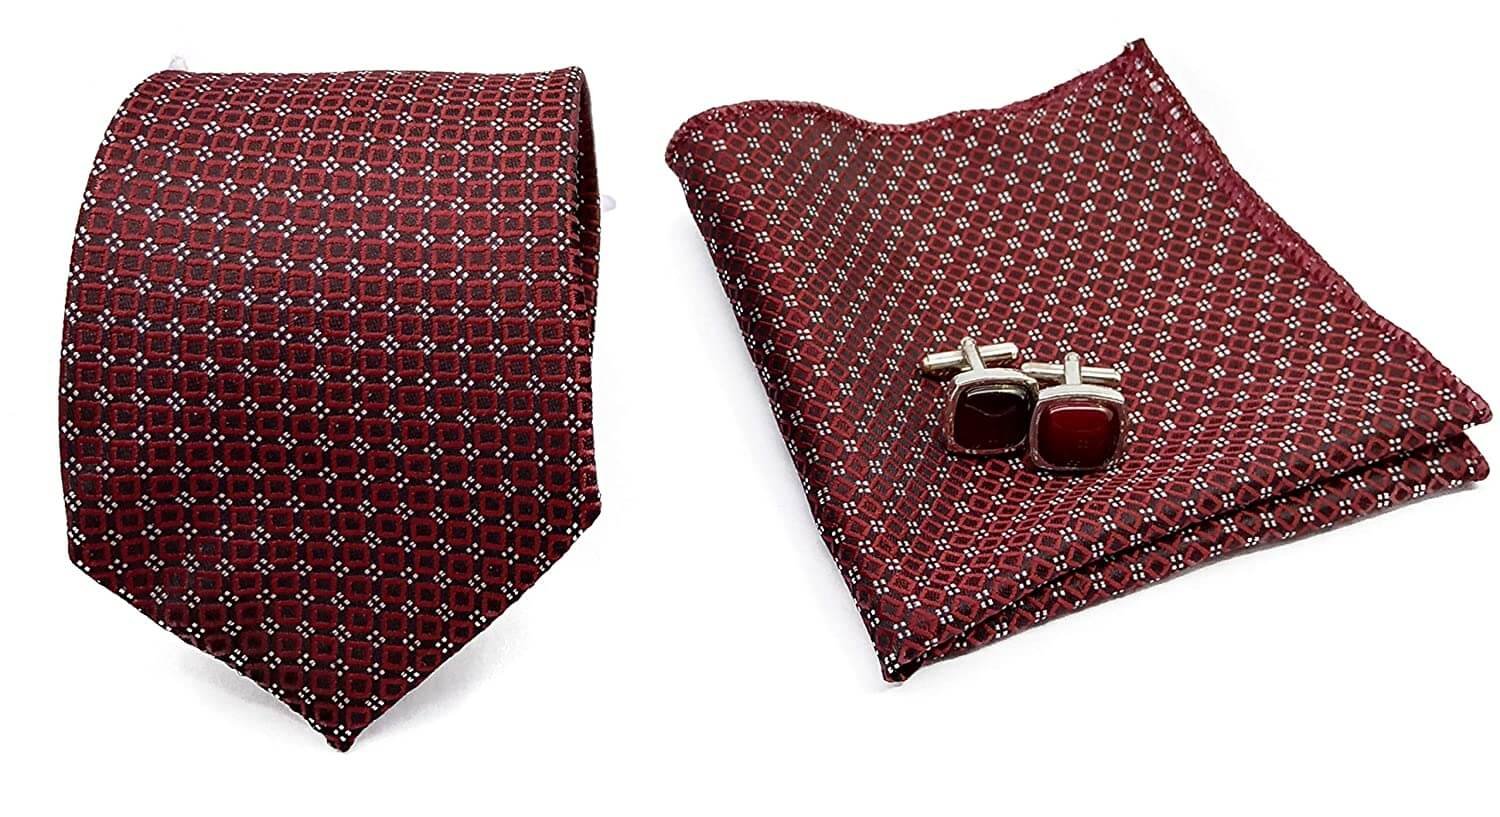 https://shoppingyatra.com/product_images/Ollera Men Premium Neck Tie and Pocket Square with Cufflink Combo Gift Set2.jpg